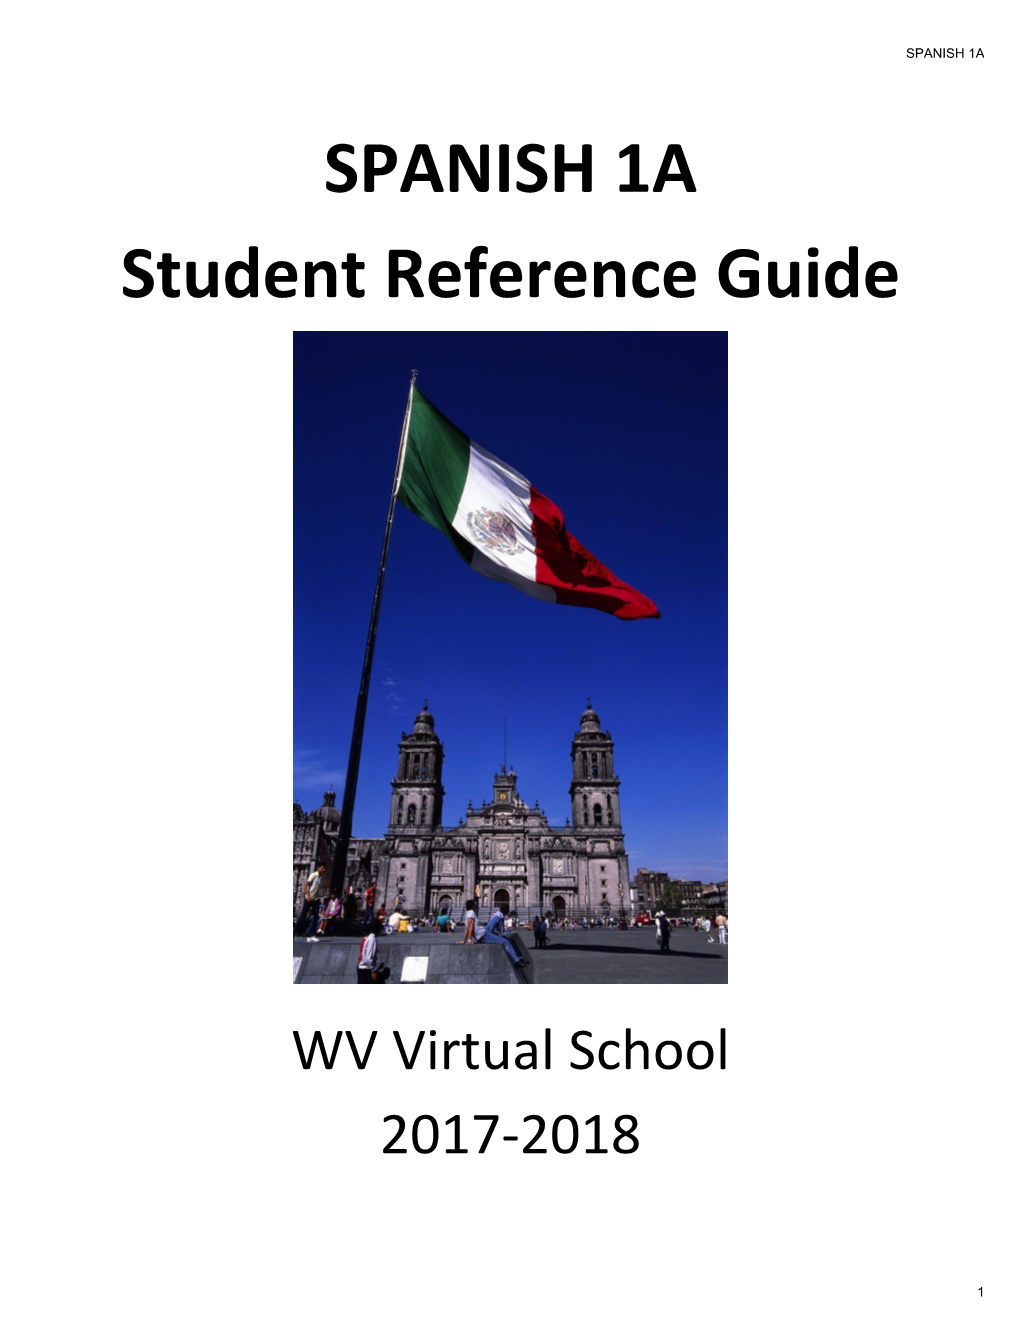 SPANISH 1A Student Reference Guide